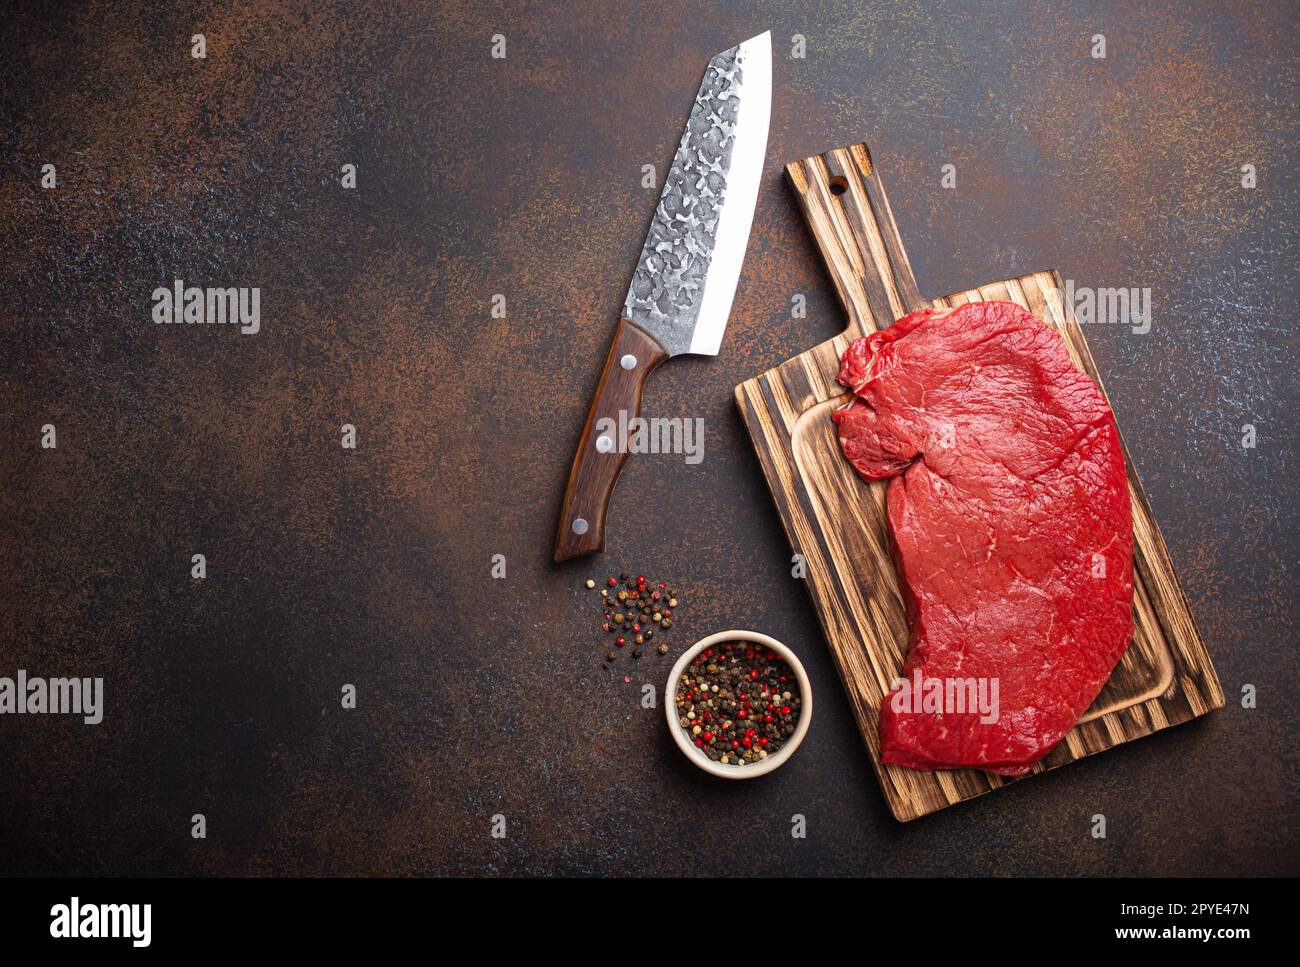 https://c8.alamy.com/comp/2PYE47N/raw-uncooked-top-round-beef-steak-on-wooden-cutting-board-with-big-kitchen-knife-and-pepper-on-dark-brown-rustic-stone-background-top-view-cooking-2PYE47N.jpg